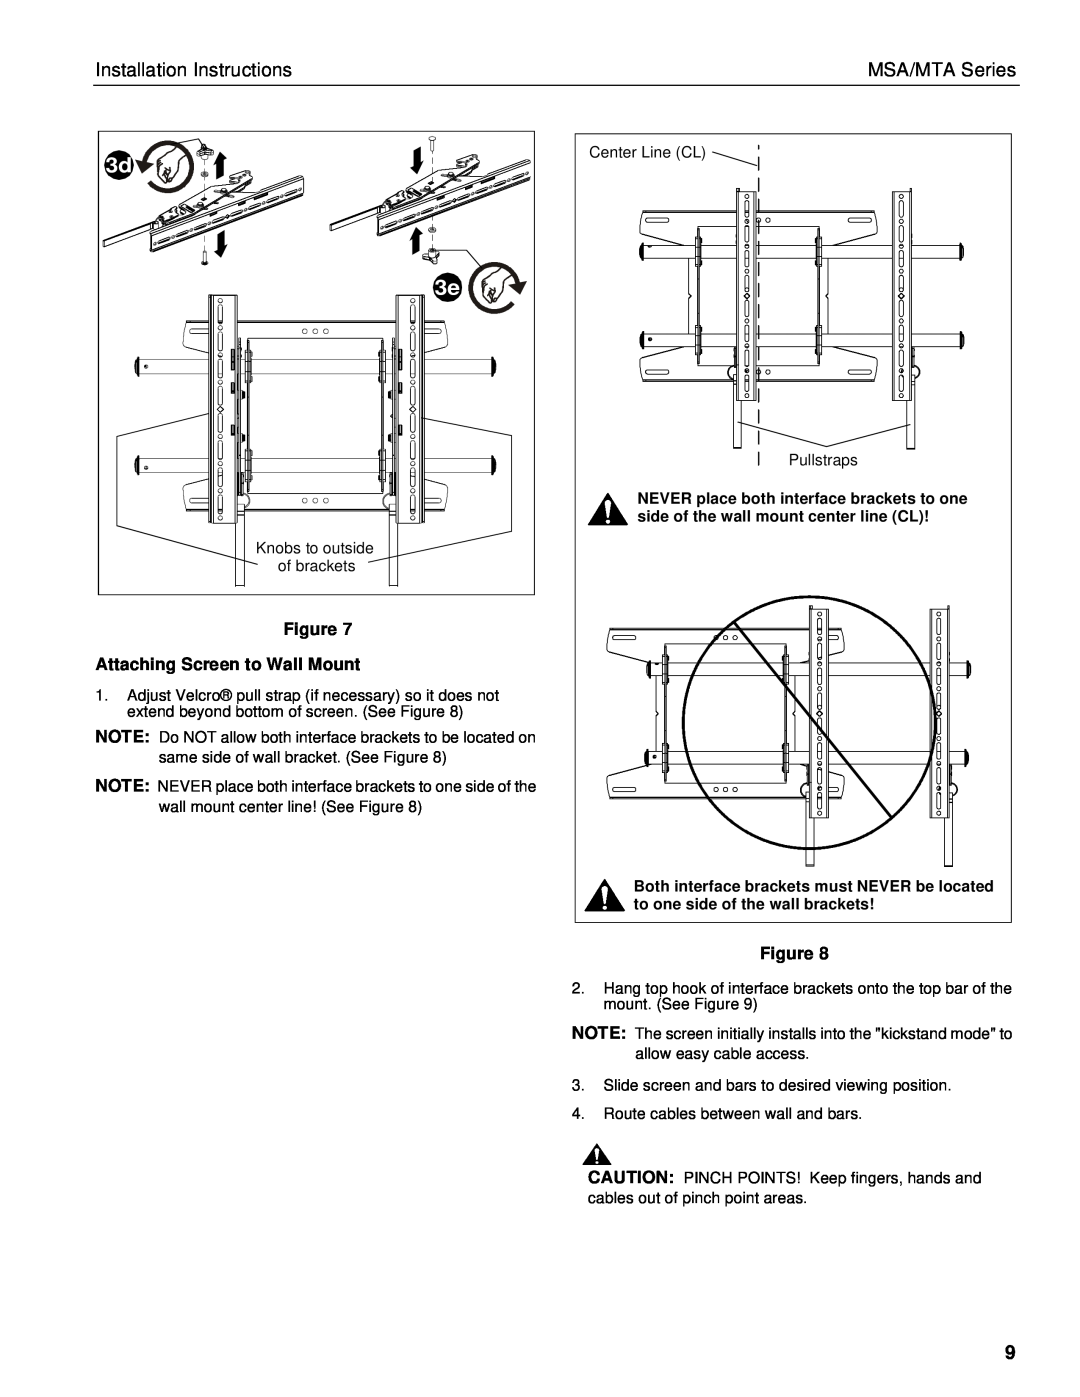 Chief Manufacturing MSA Series Figure Attaching Screen to Wall Mount, Installation Instructions, MSA/MTA Series 